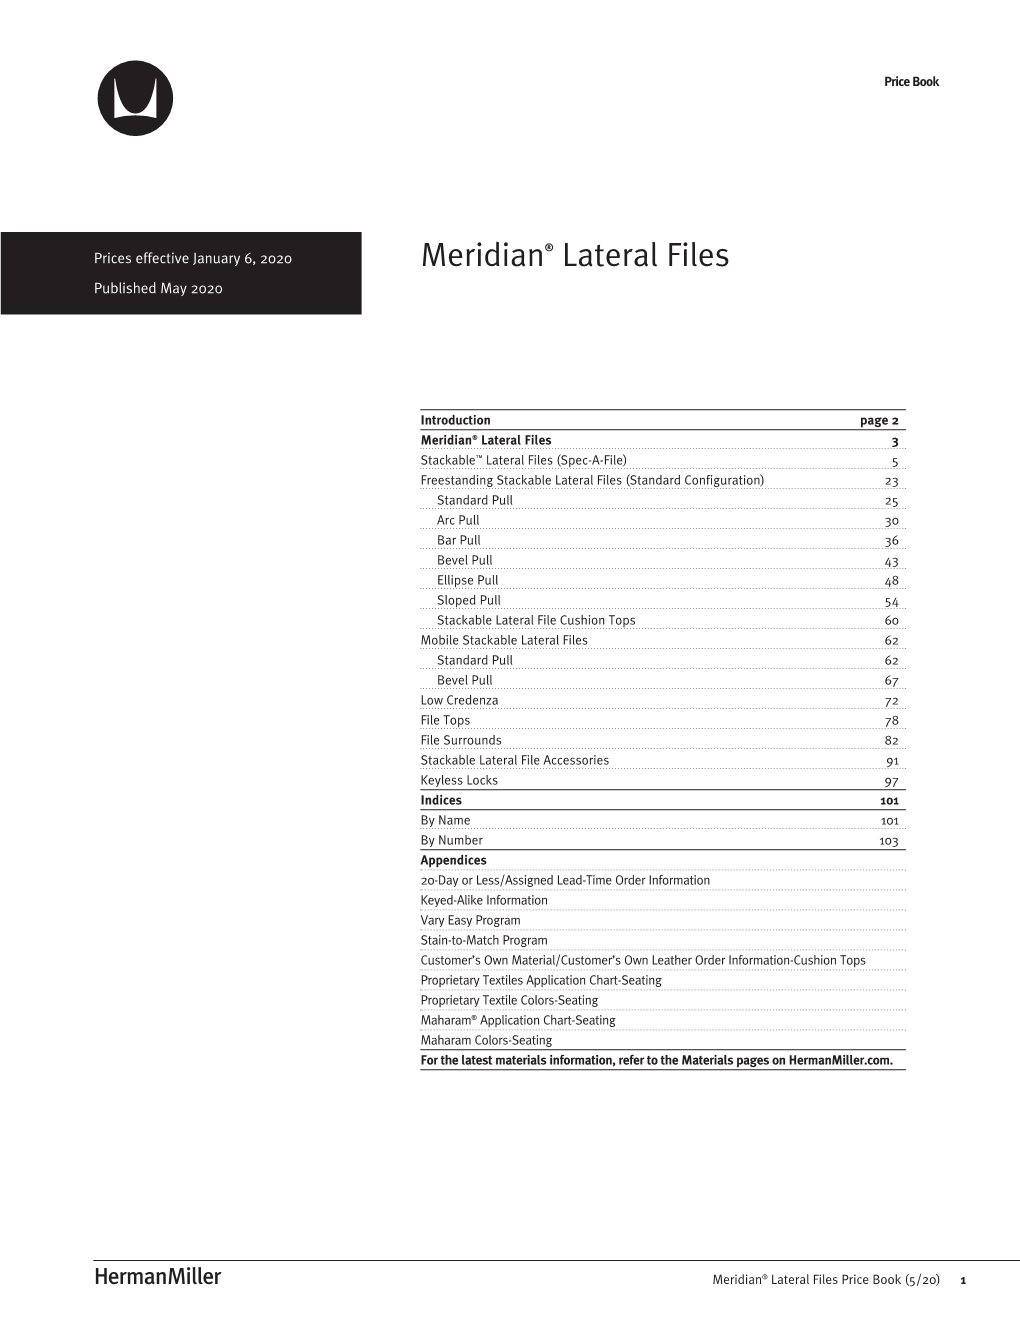 Meridian Lateral Files